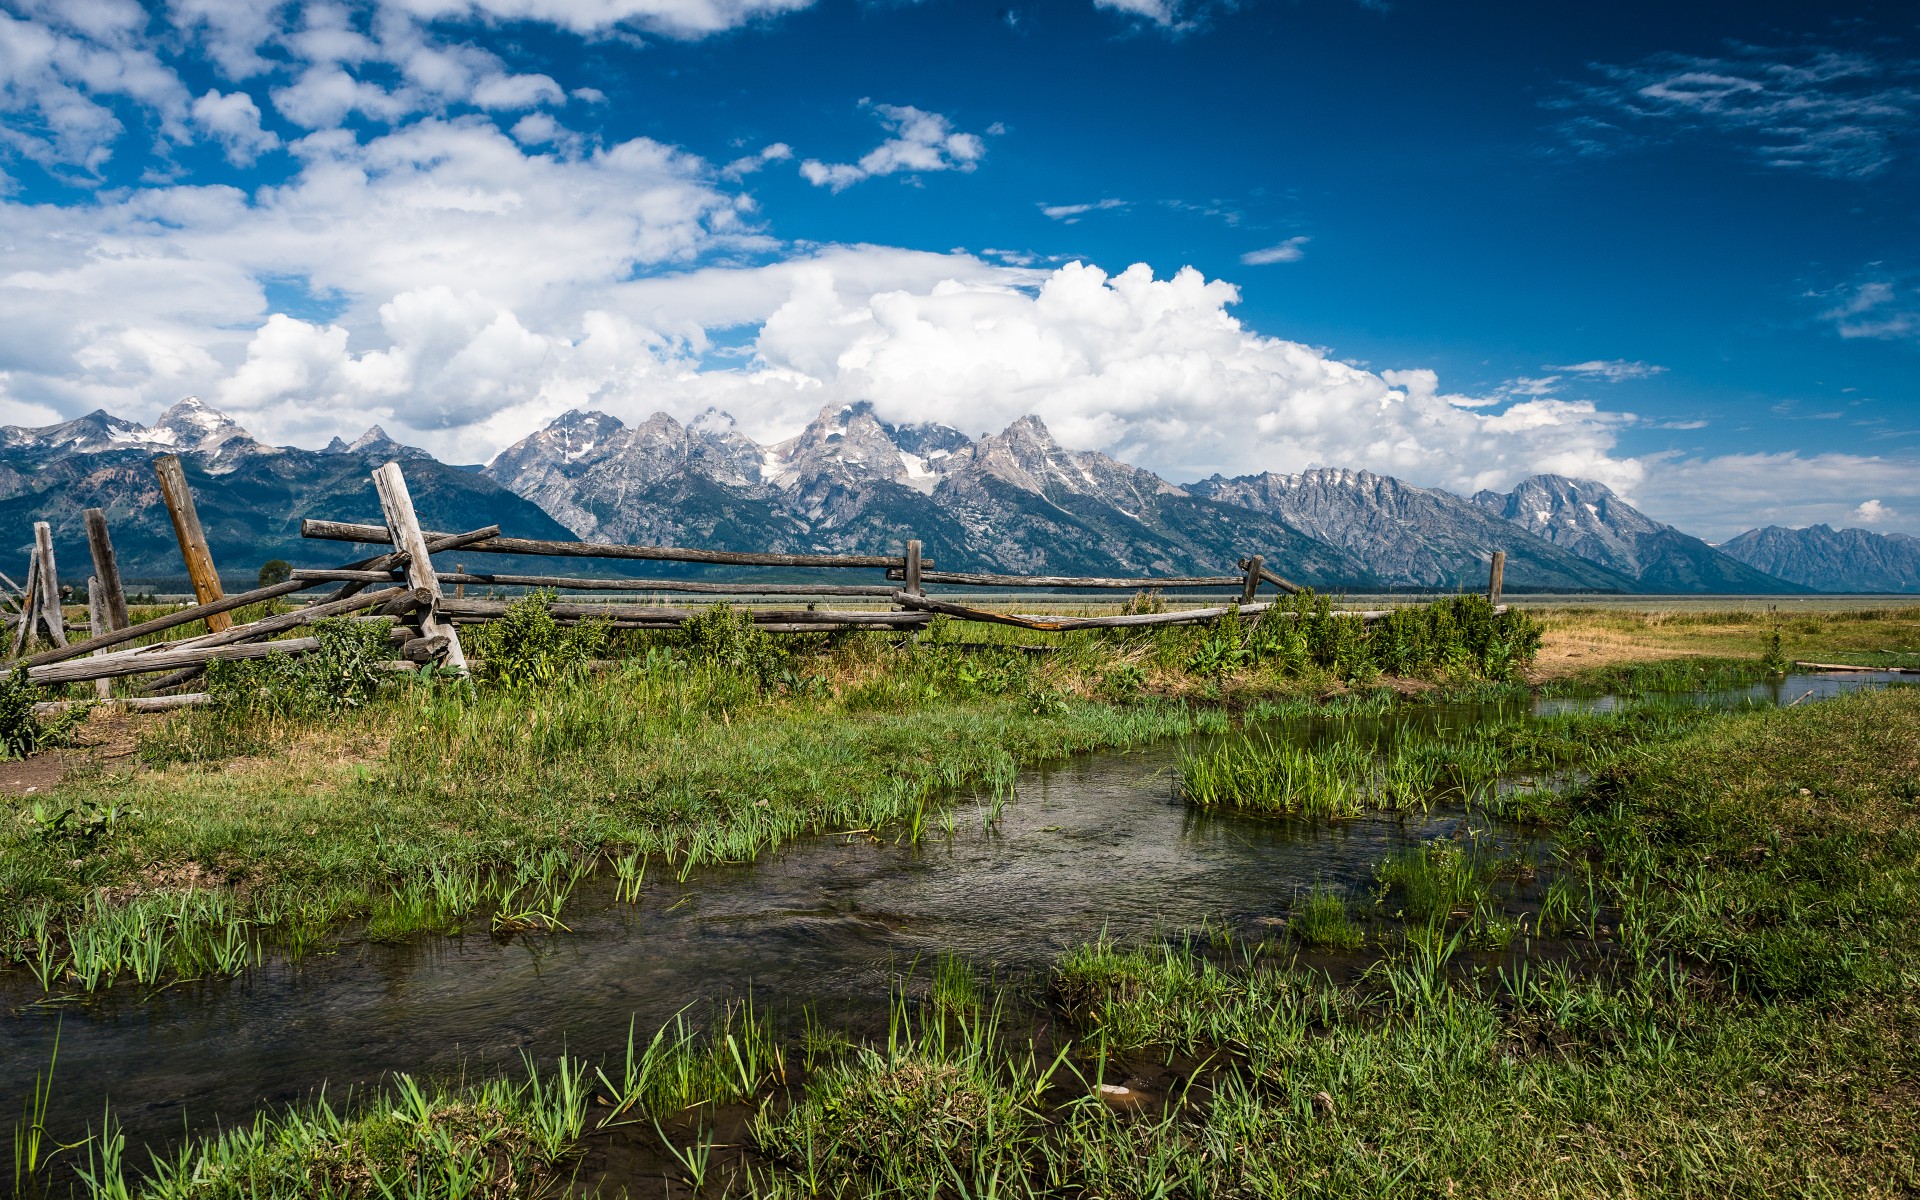 grand, Teton, National, Park, Nature, Landscapes, Meadow, Fields, Rivers, Streams, Water, Reflection, Grass, Fence, Mountains, Snow, Peaks, Sky, Clouds, Scenic Wallpaper